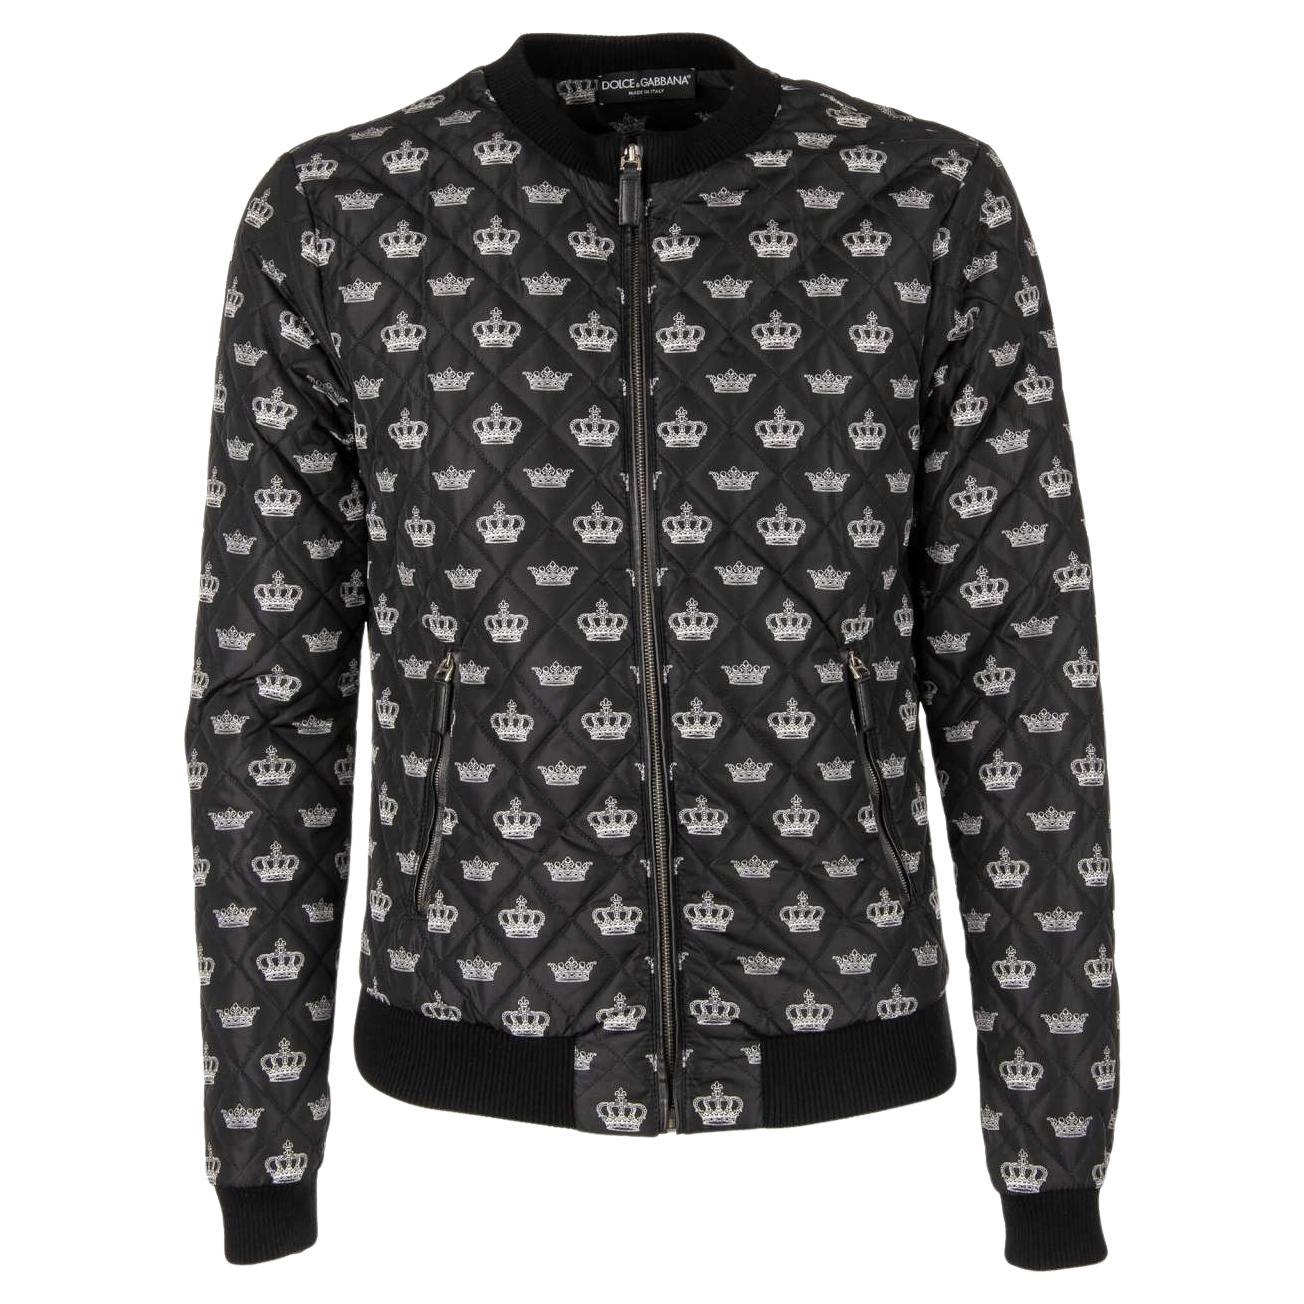 D&G Quilted Crowns Printed Bomber Jacket with Leather Details Black 46 For Sale